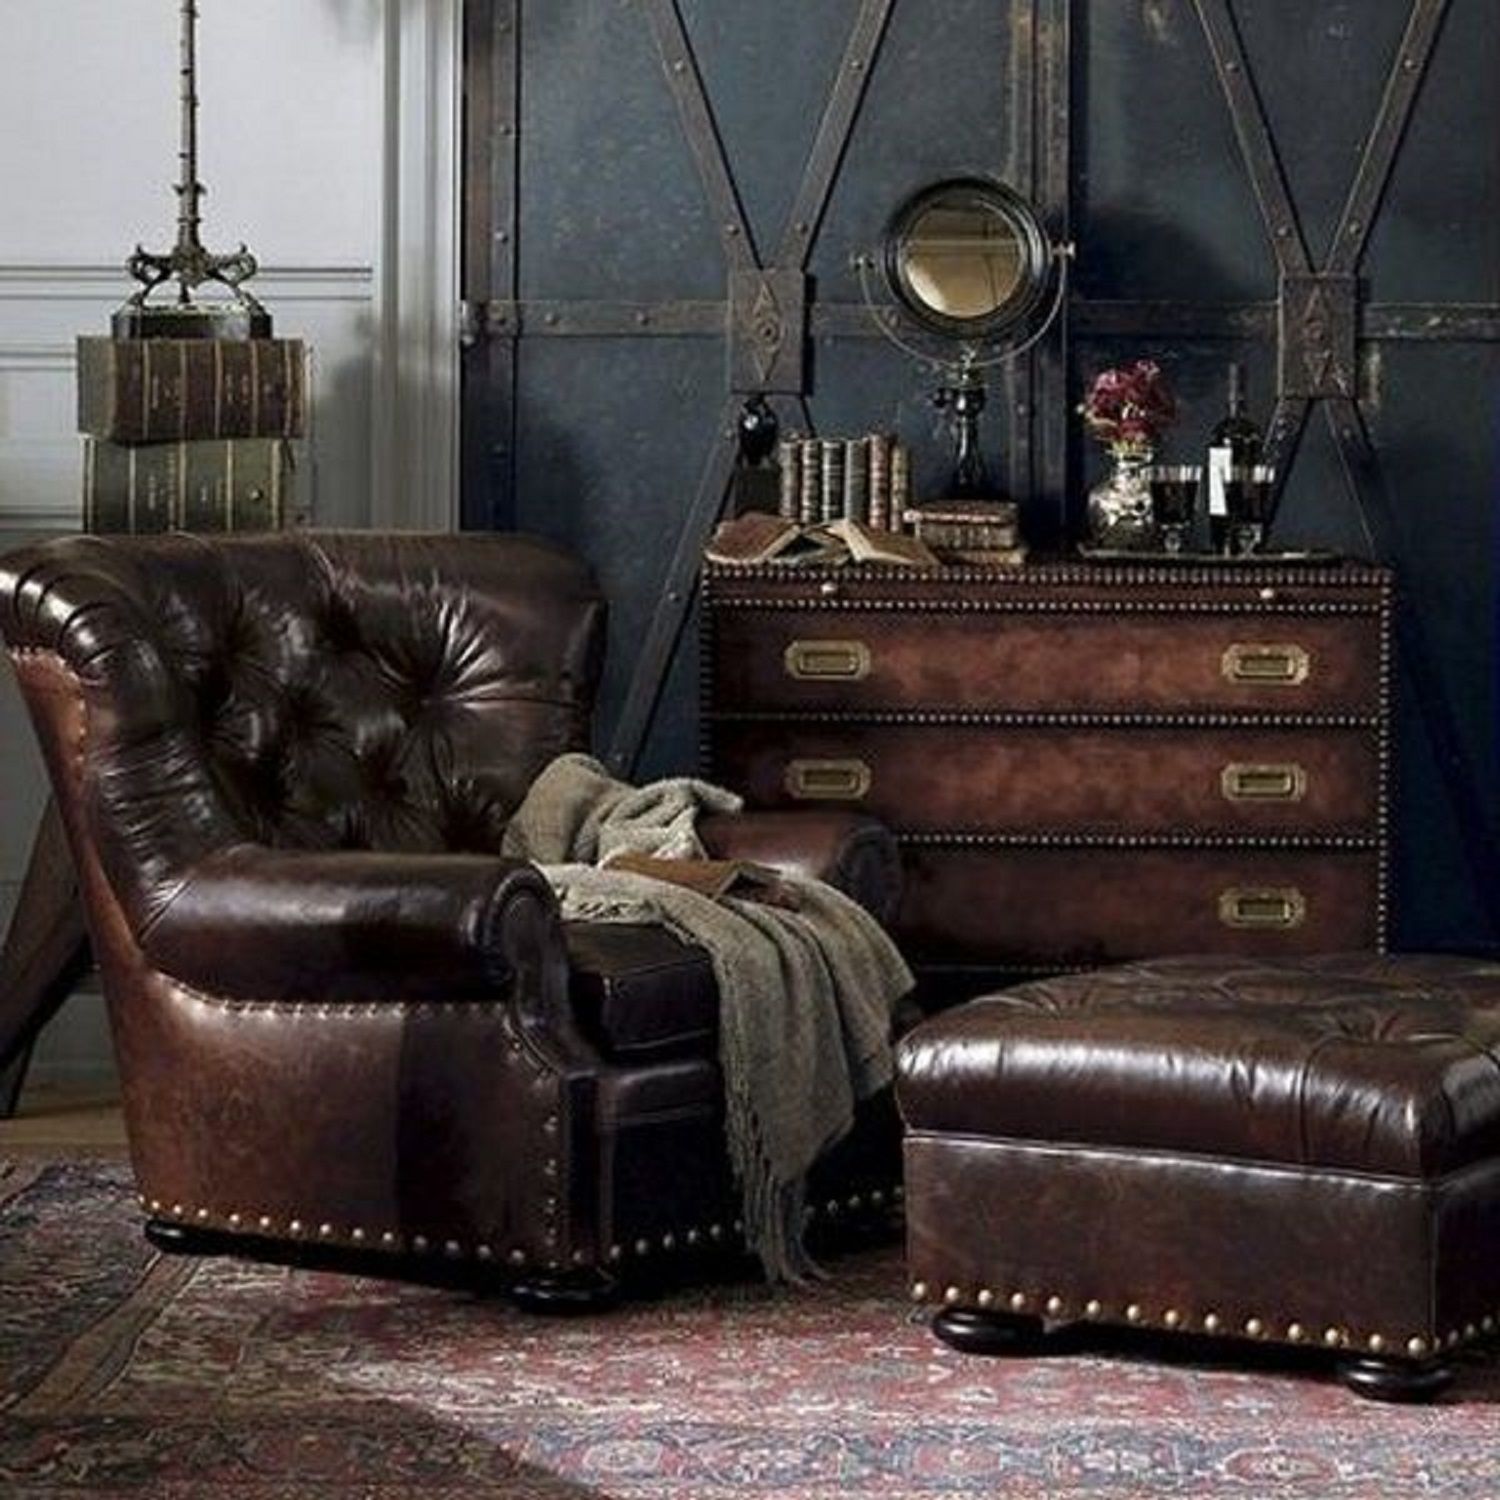 How To Decorate With Steampunk Style Photos And Tips